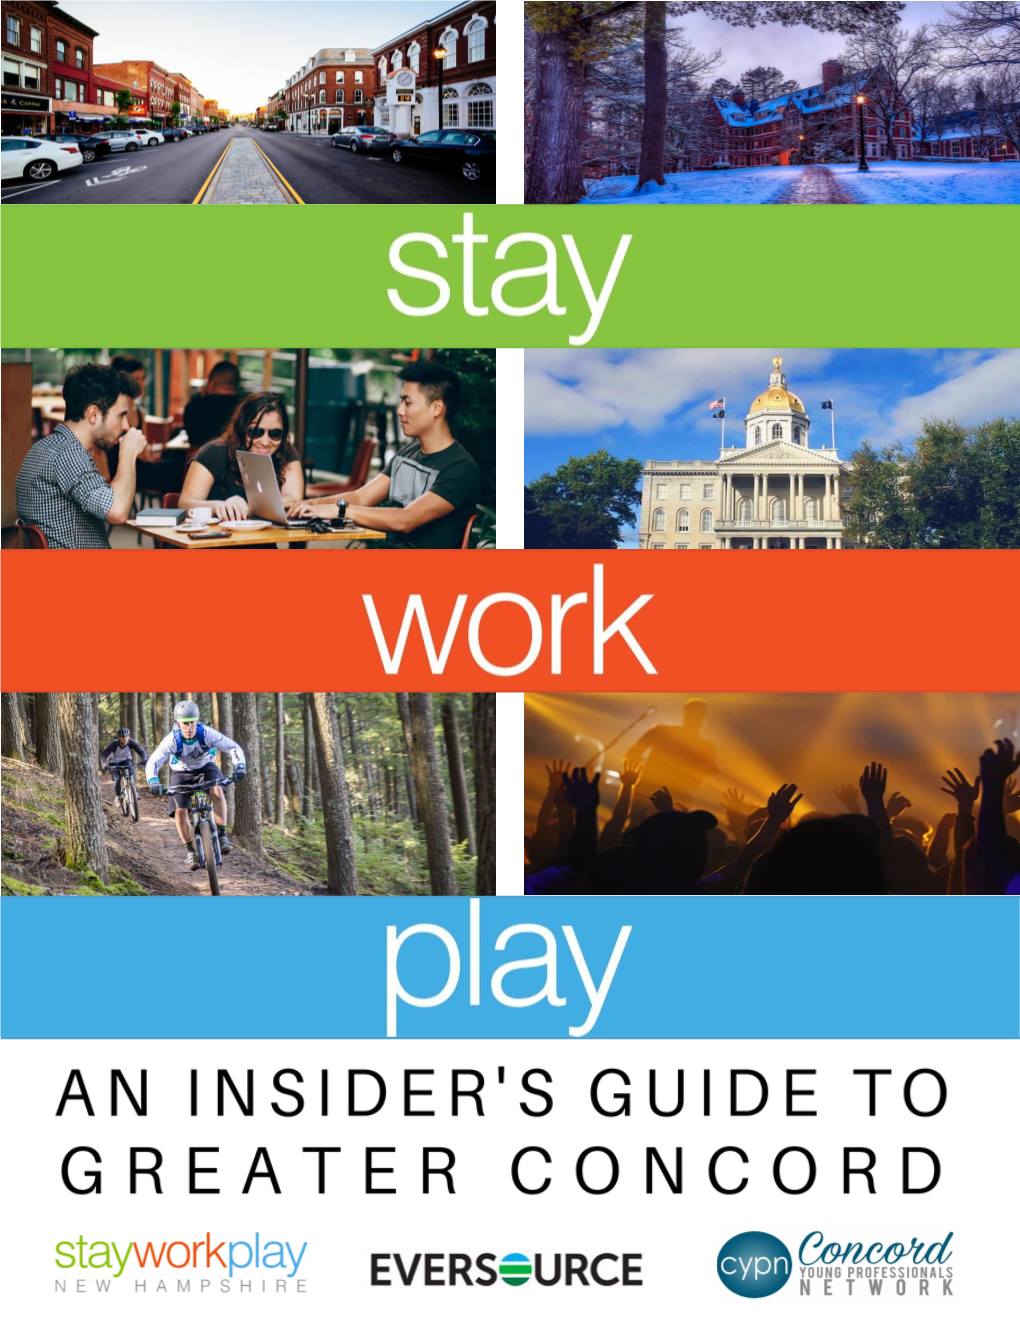 Regional-Insiders-Guide-Greater-Concord.Pdf